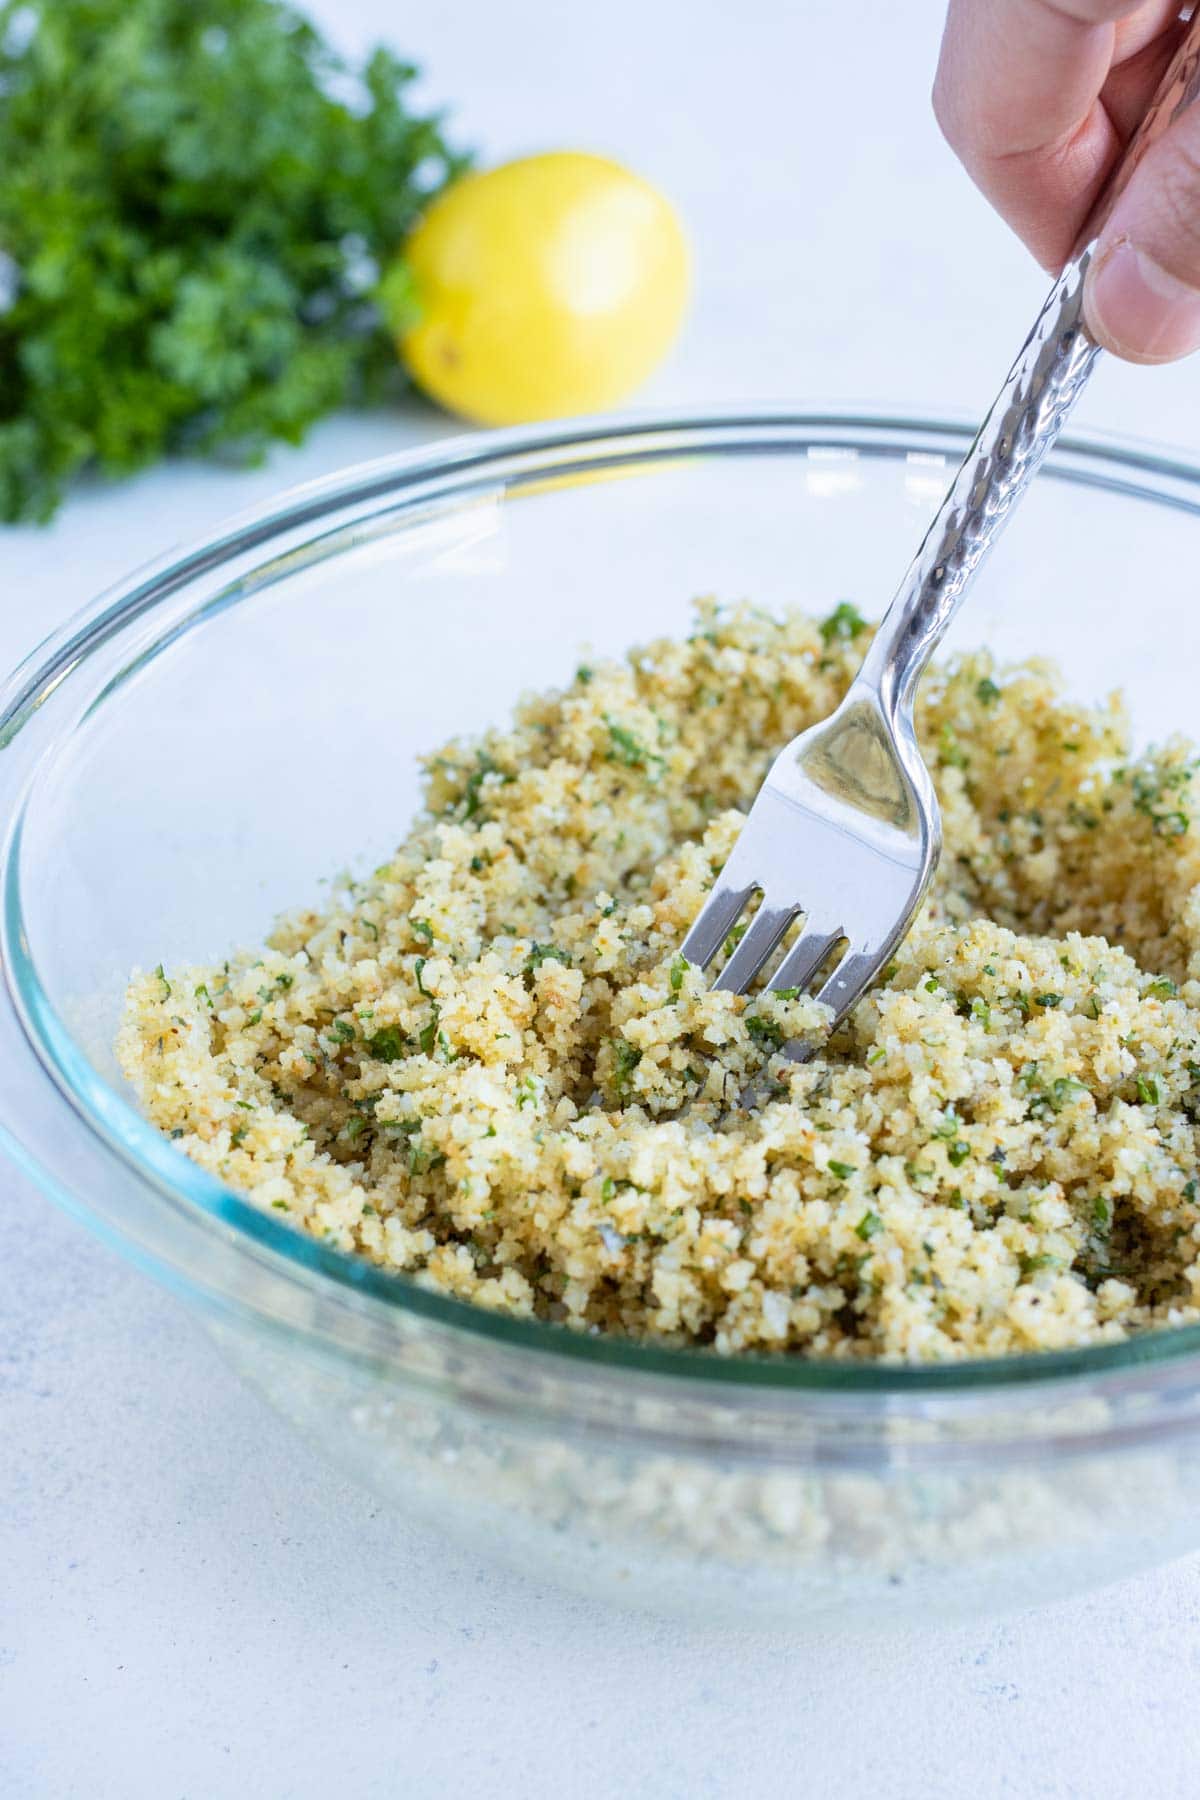 Breadcrumbs are combined with Parmesan cheese, parsley, salt, pepper, zest, and oil in a bowl.